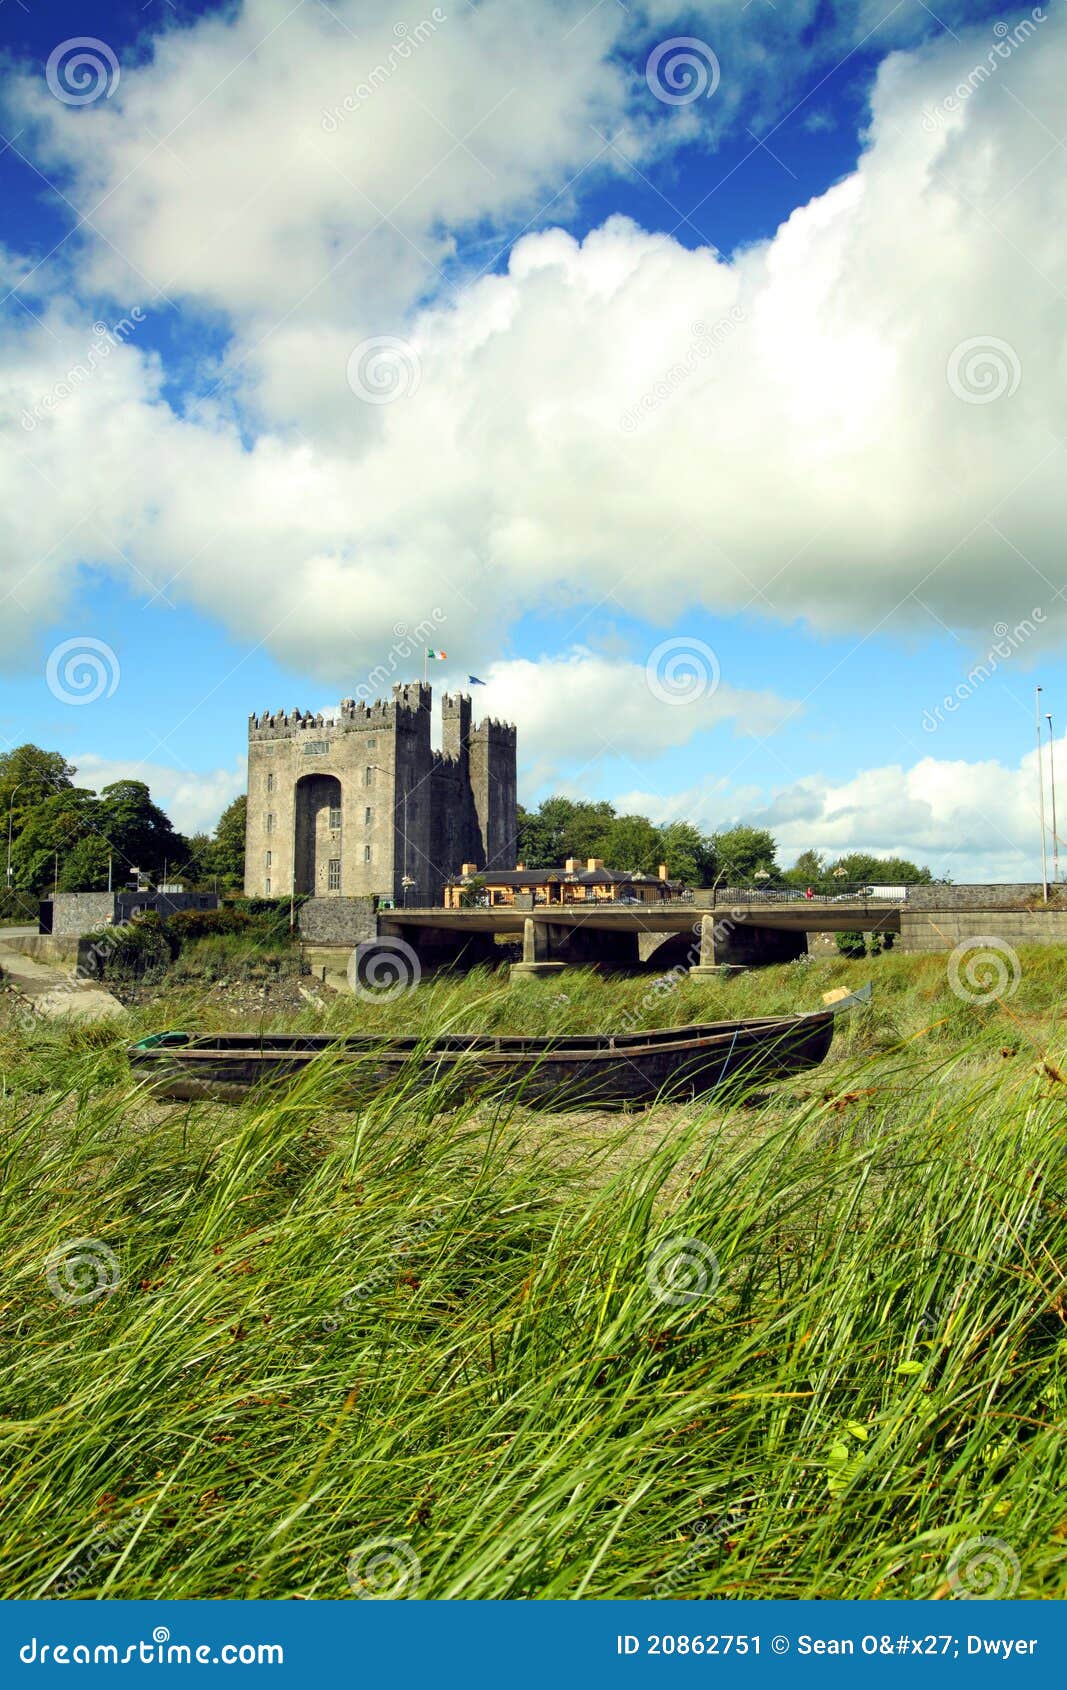 Bunratty castle county Clare Ireland with a boat in the foreground.